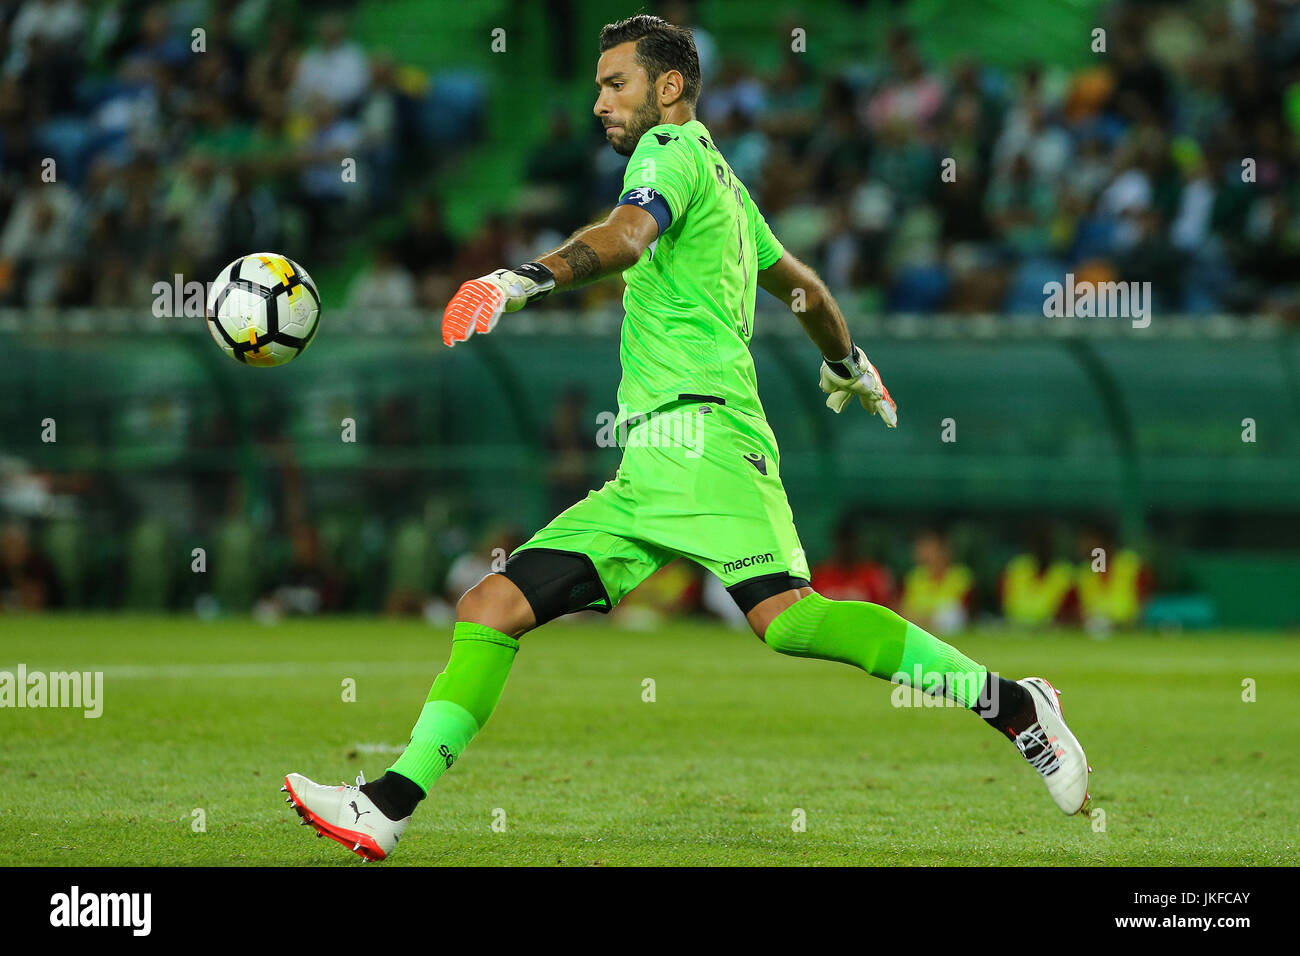 Lisbon, Portugal. 22nd July, 2017. Sporting«s goalkeeper Rui Patricio from Portugal   during the Pre-season Friendly match between Sporting CP and AS Monaco at Estadio Jose Alvalade on July 22, 2017 in Lisbon, Portugal.. Credit: Bruno Barros/Alamy Live News Stock Photo